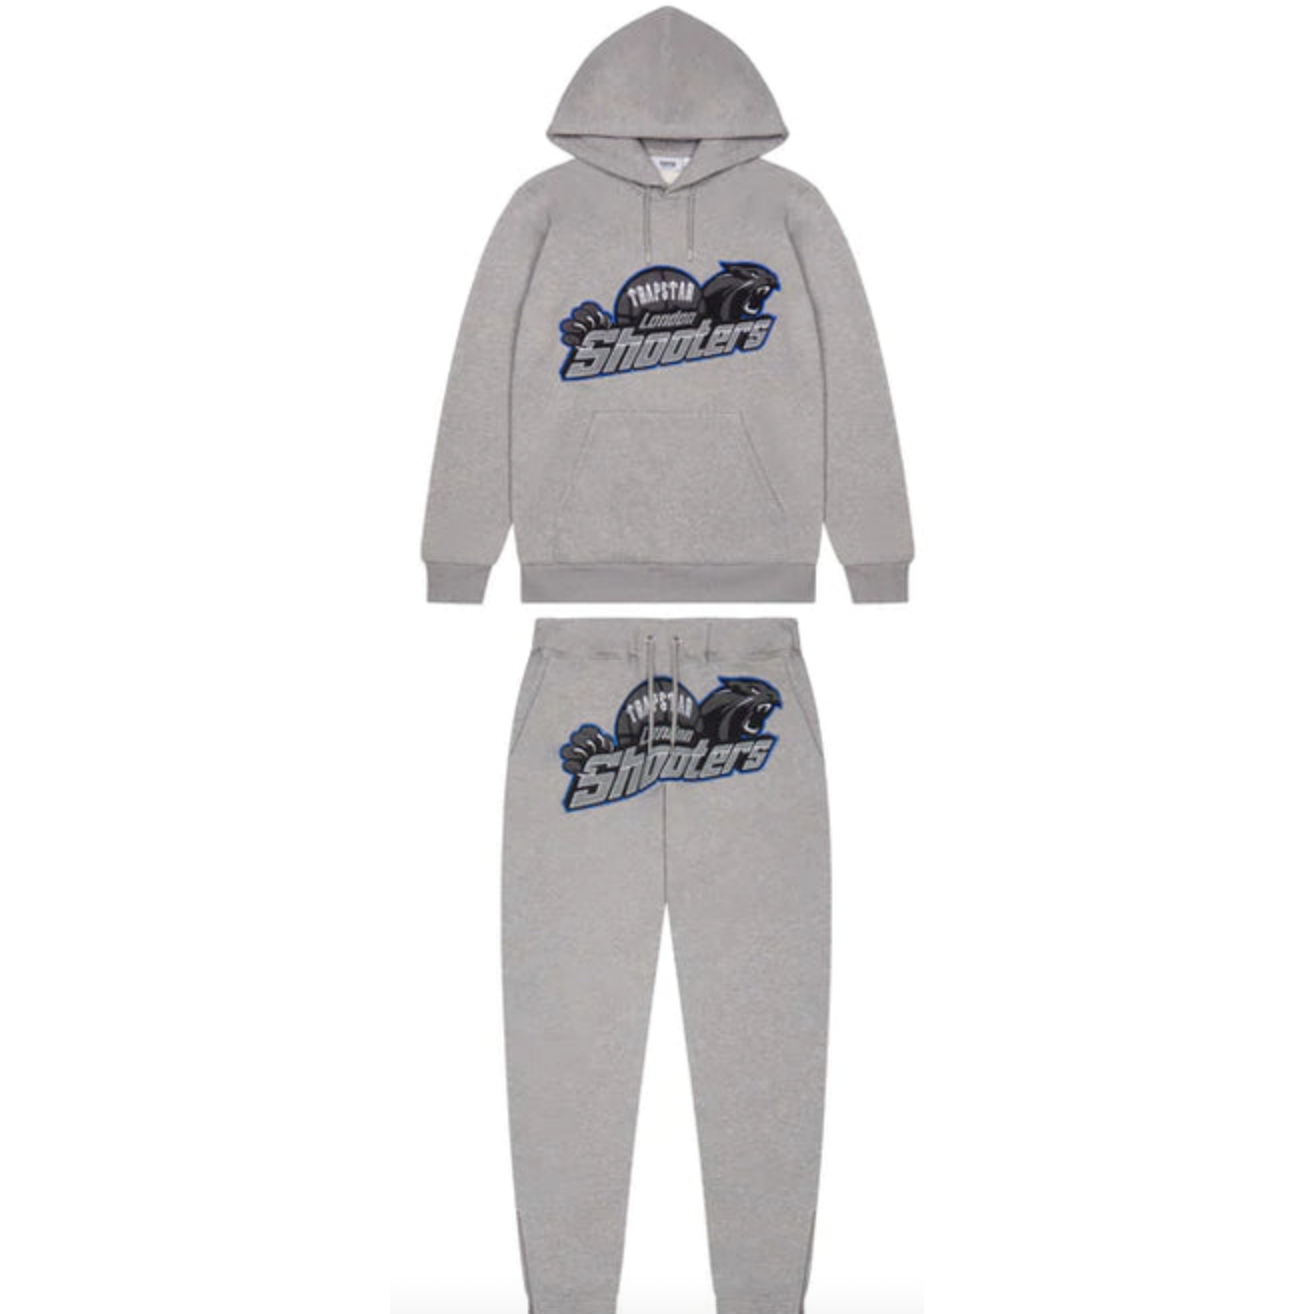 Trapstar London Shooters Hooded Tracksuit Grey/Blue by Trapstar from £285.00